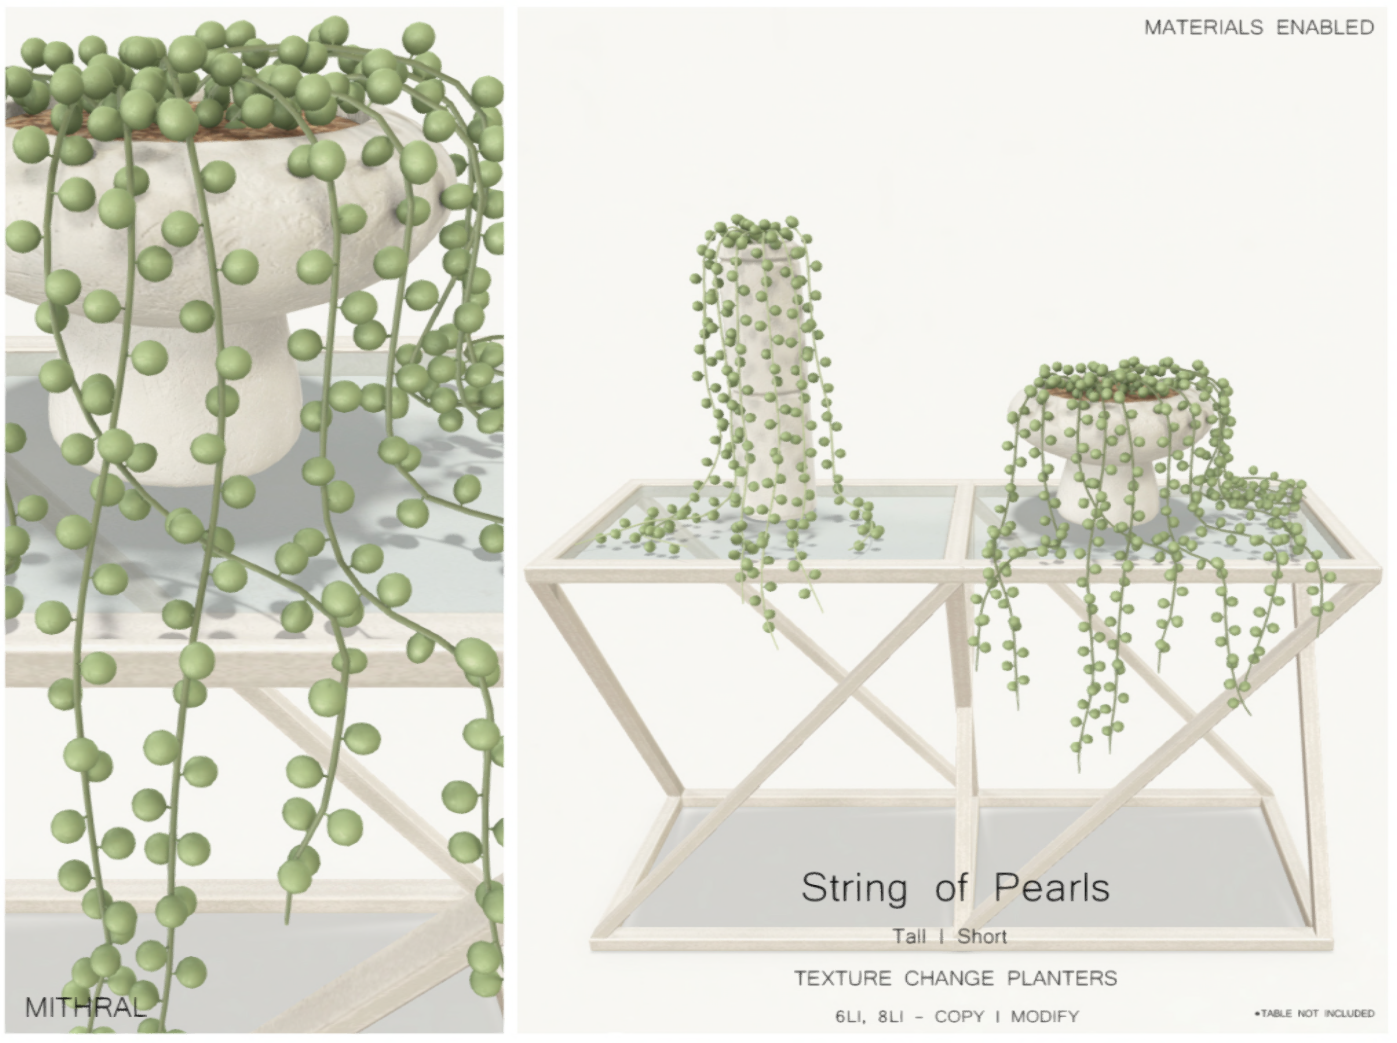 Mithral – String of Pearls Planters